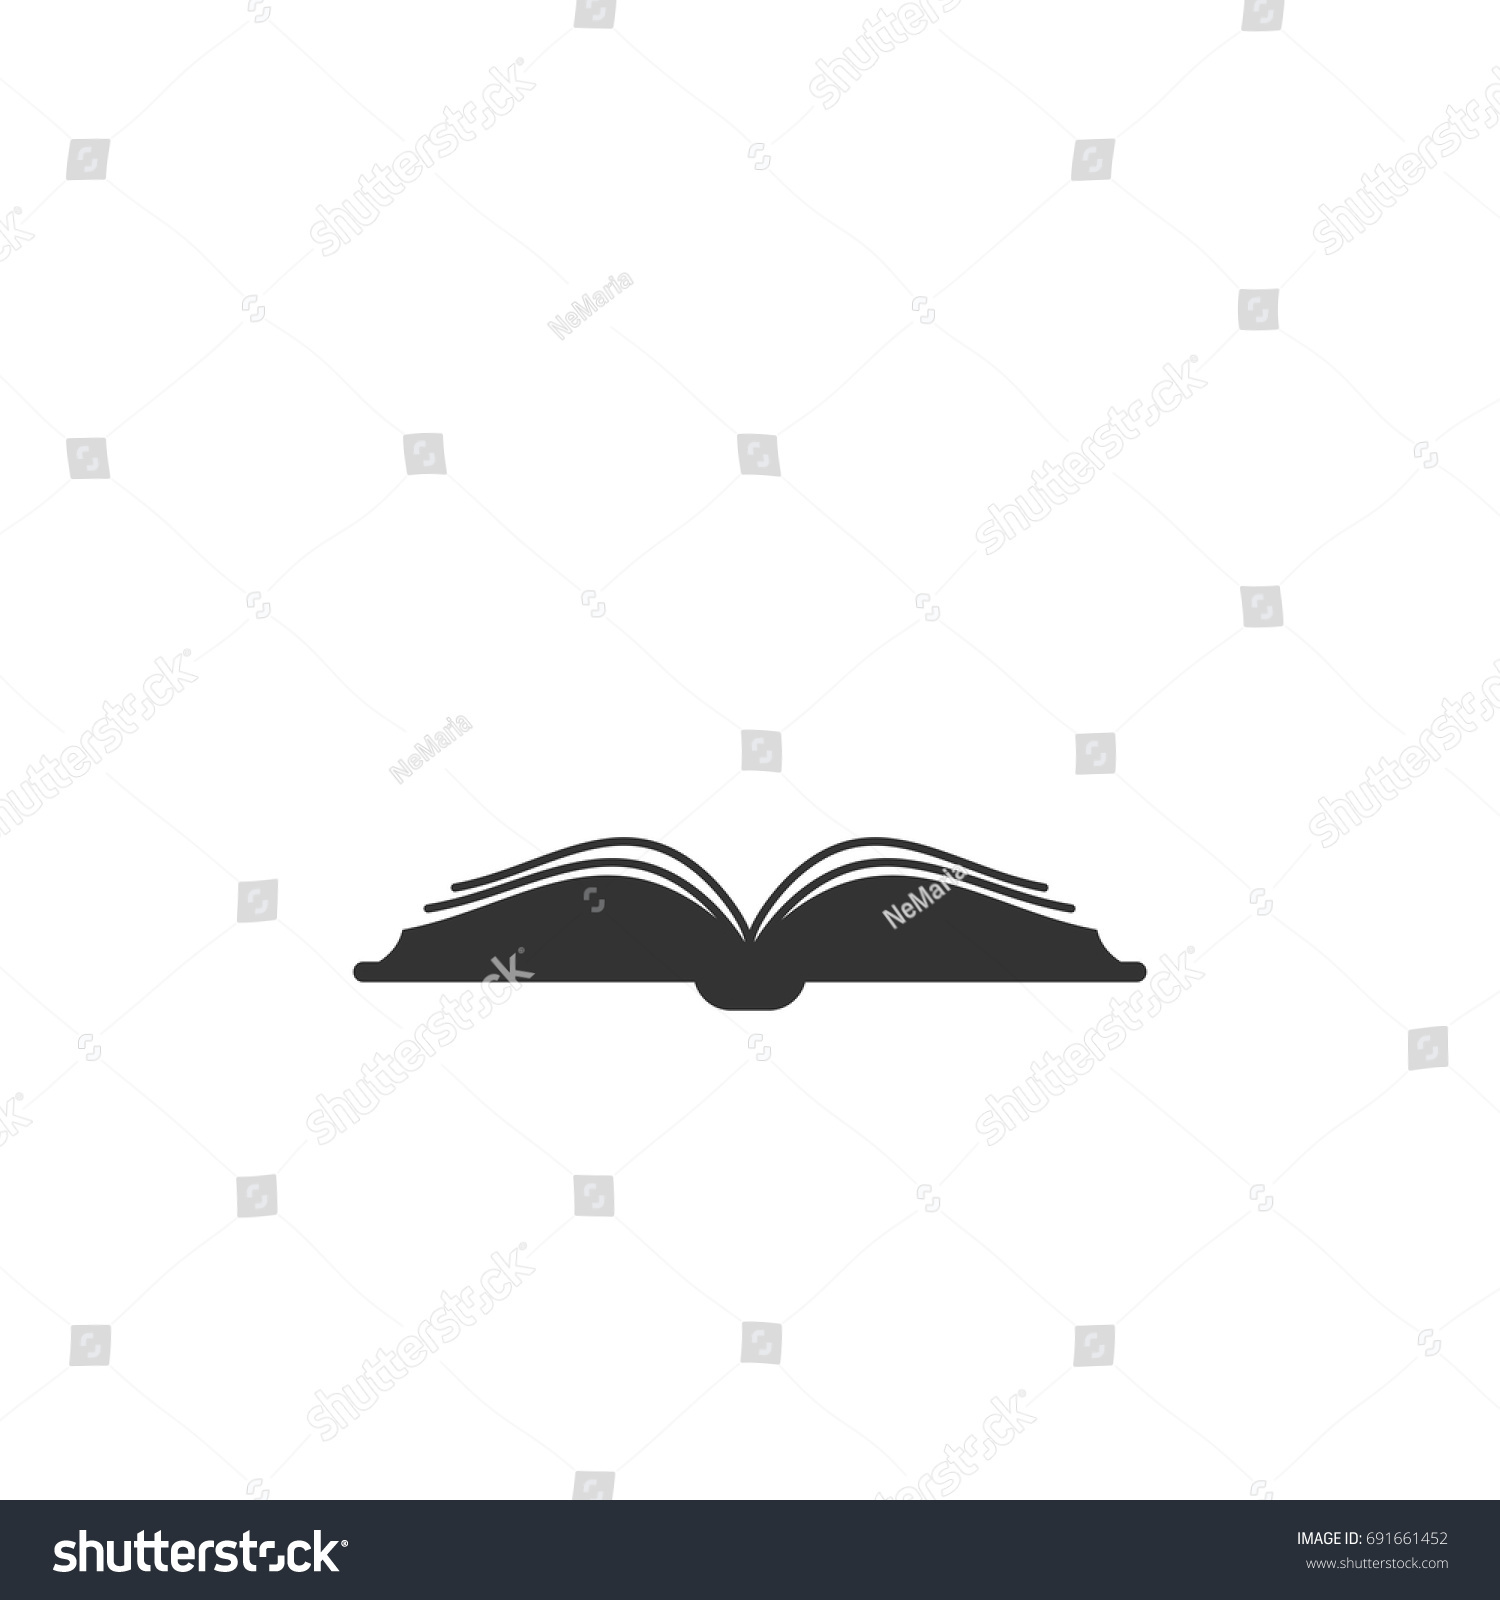 Black Thick Opened Book Curved Pages Stock Vector 691661452 ...